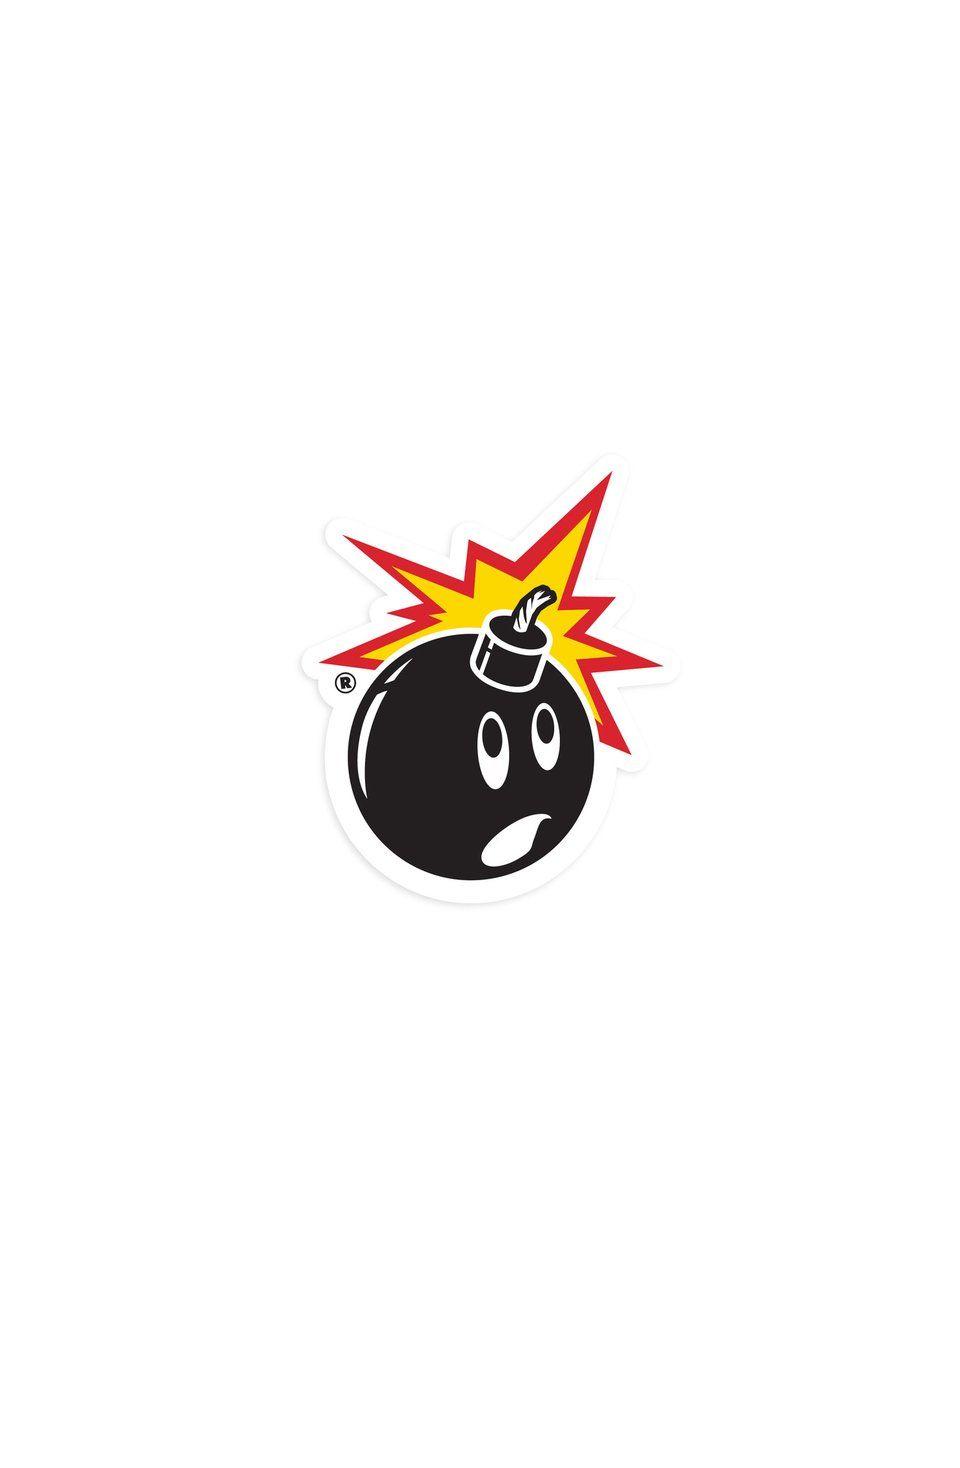 Companies with a Bomb Logo - The Hundreds